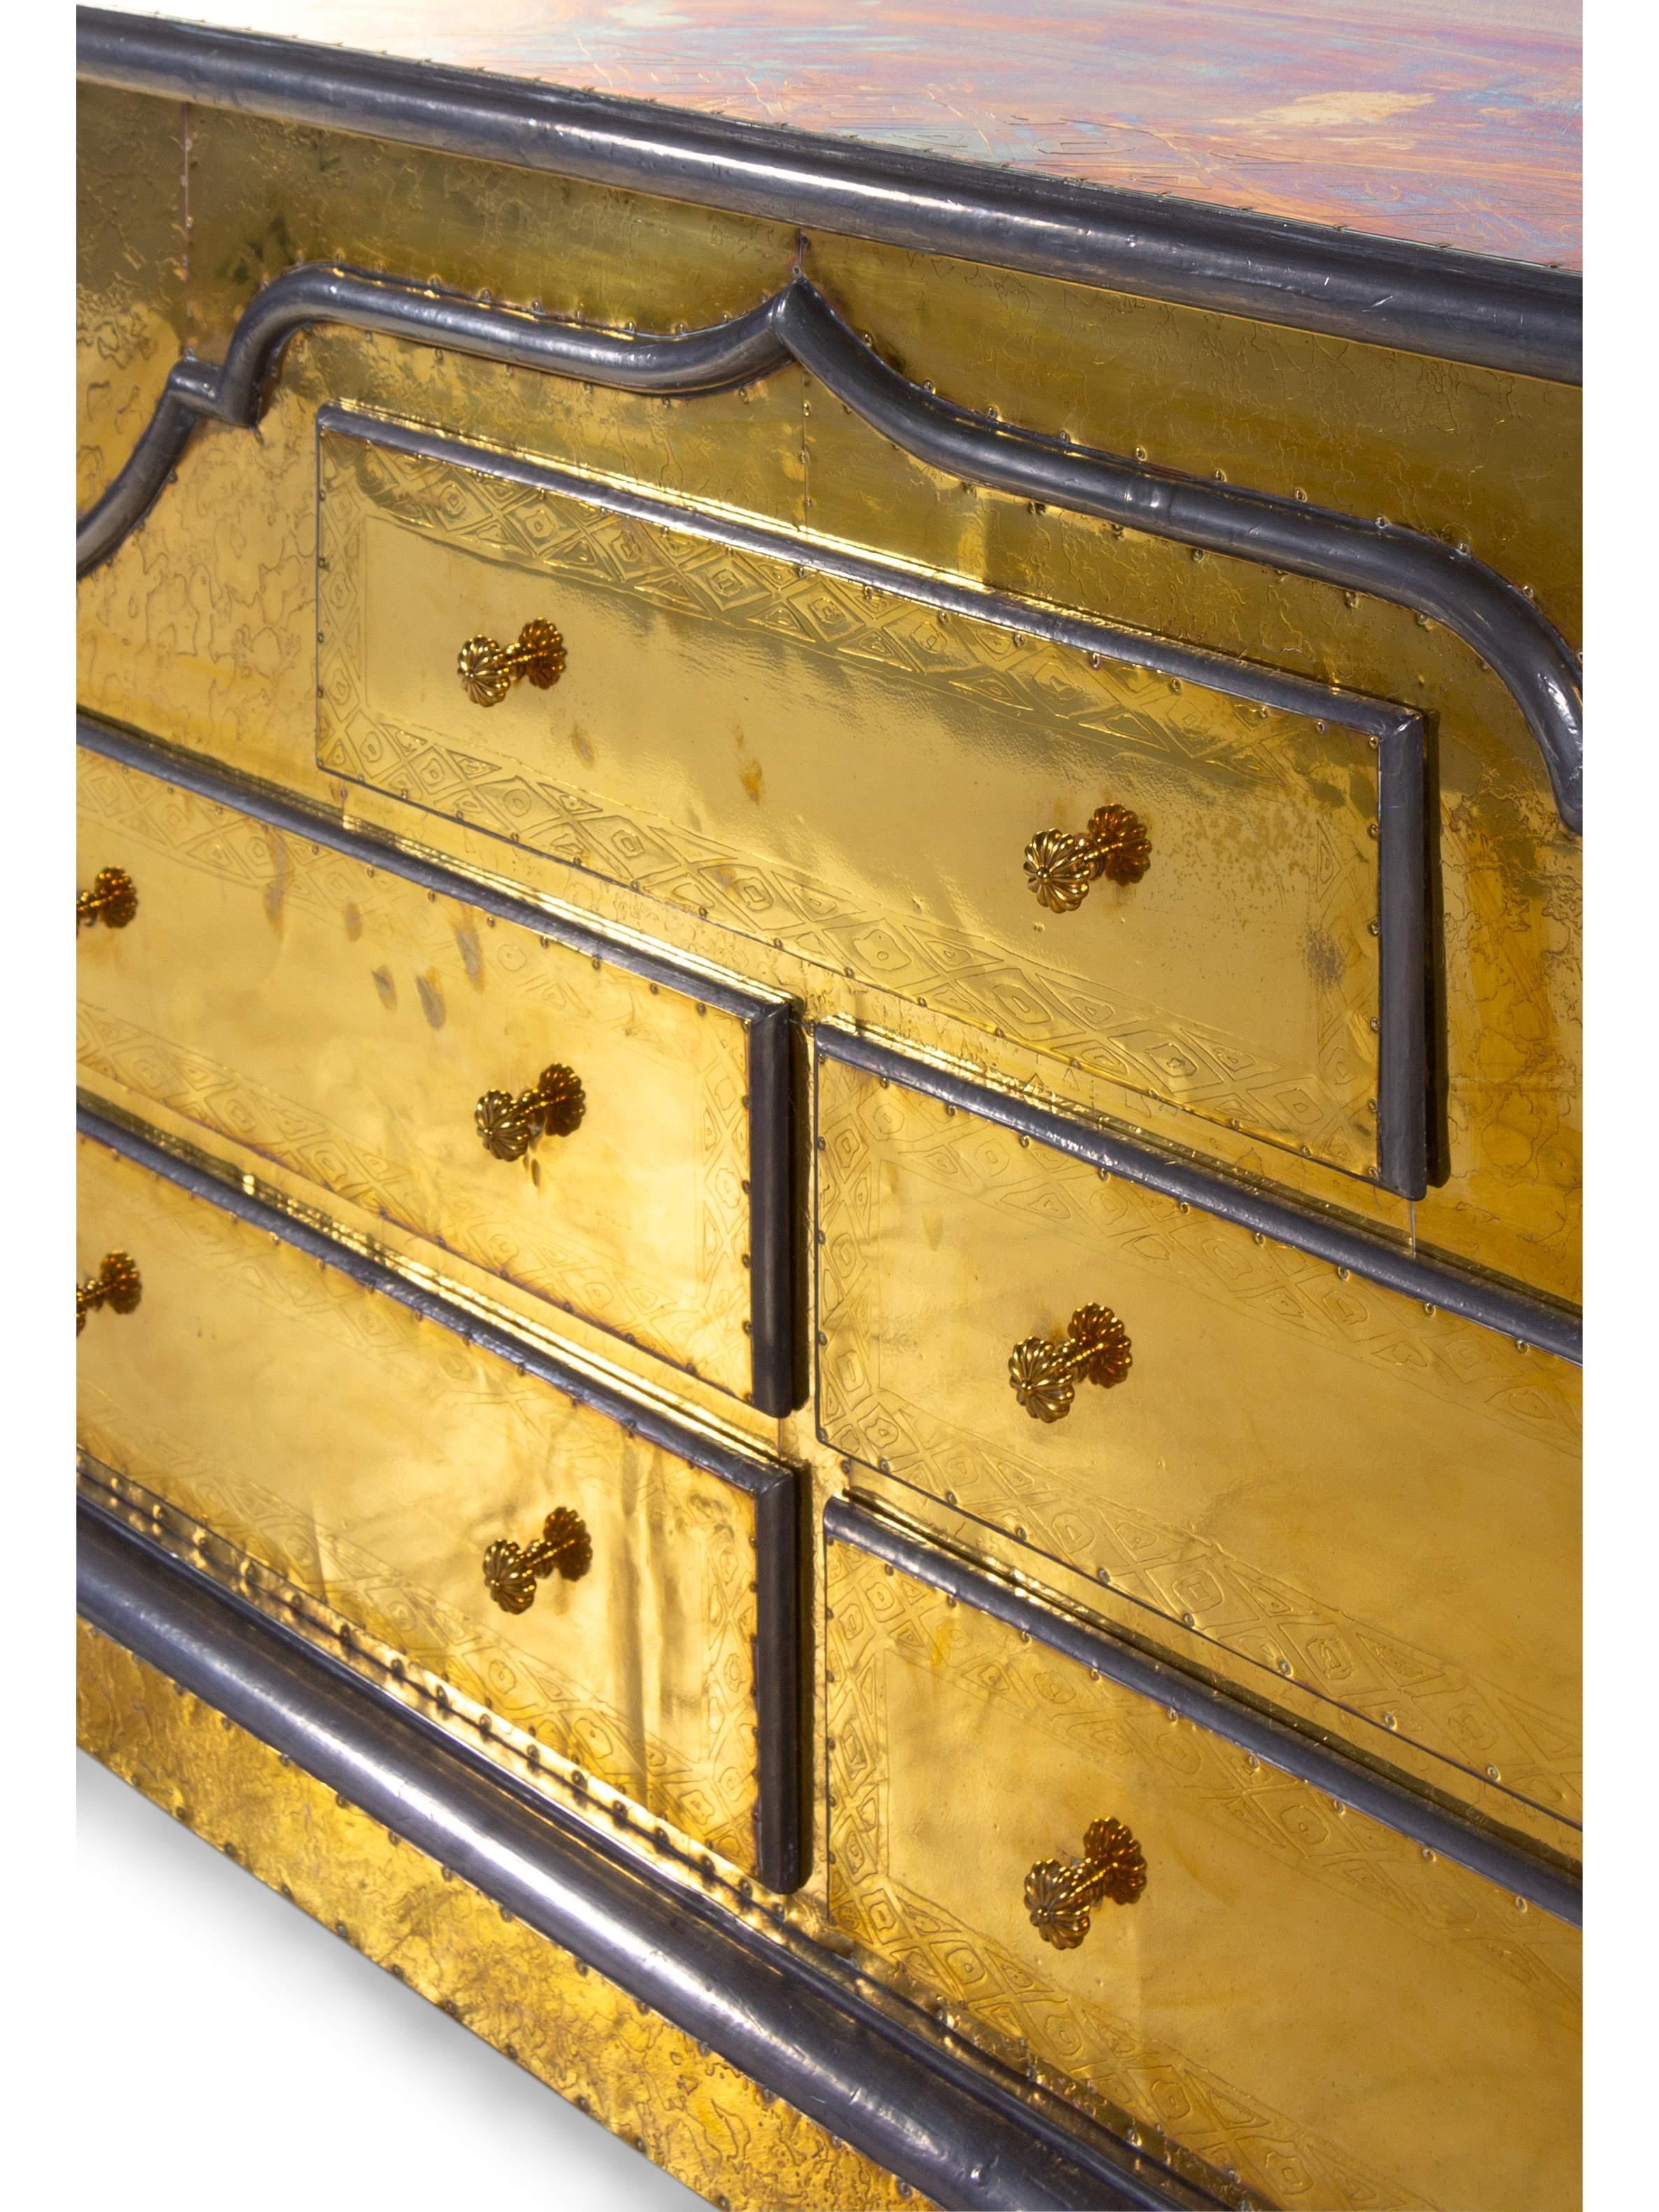 Rodolfo Dubarry handmade Spanish Regency dresser chest, gilt brass, pewter, early 1970s, Spain. Hand-tooled and gilt brass with pewter accents on wood. Gorgeous piece with stunning patina. Measures: H 32 x W 57 x D 20 inches.
 